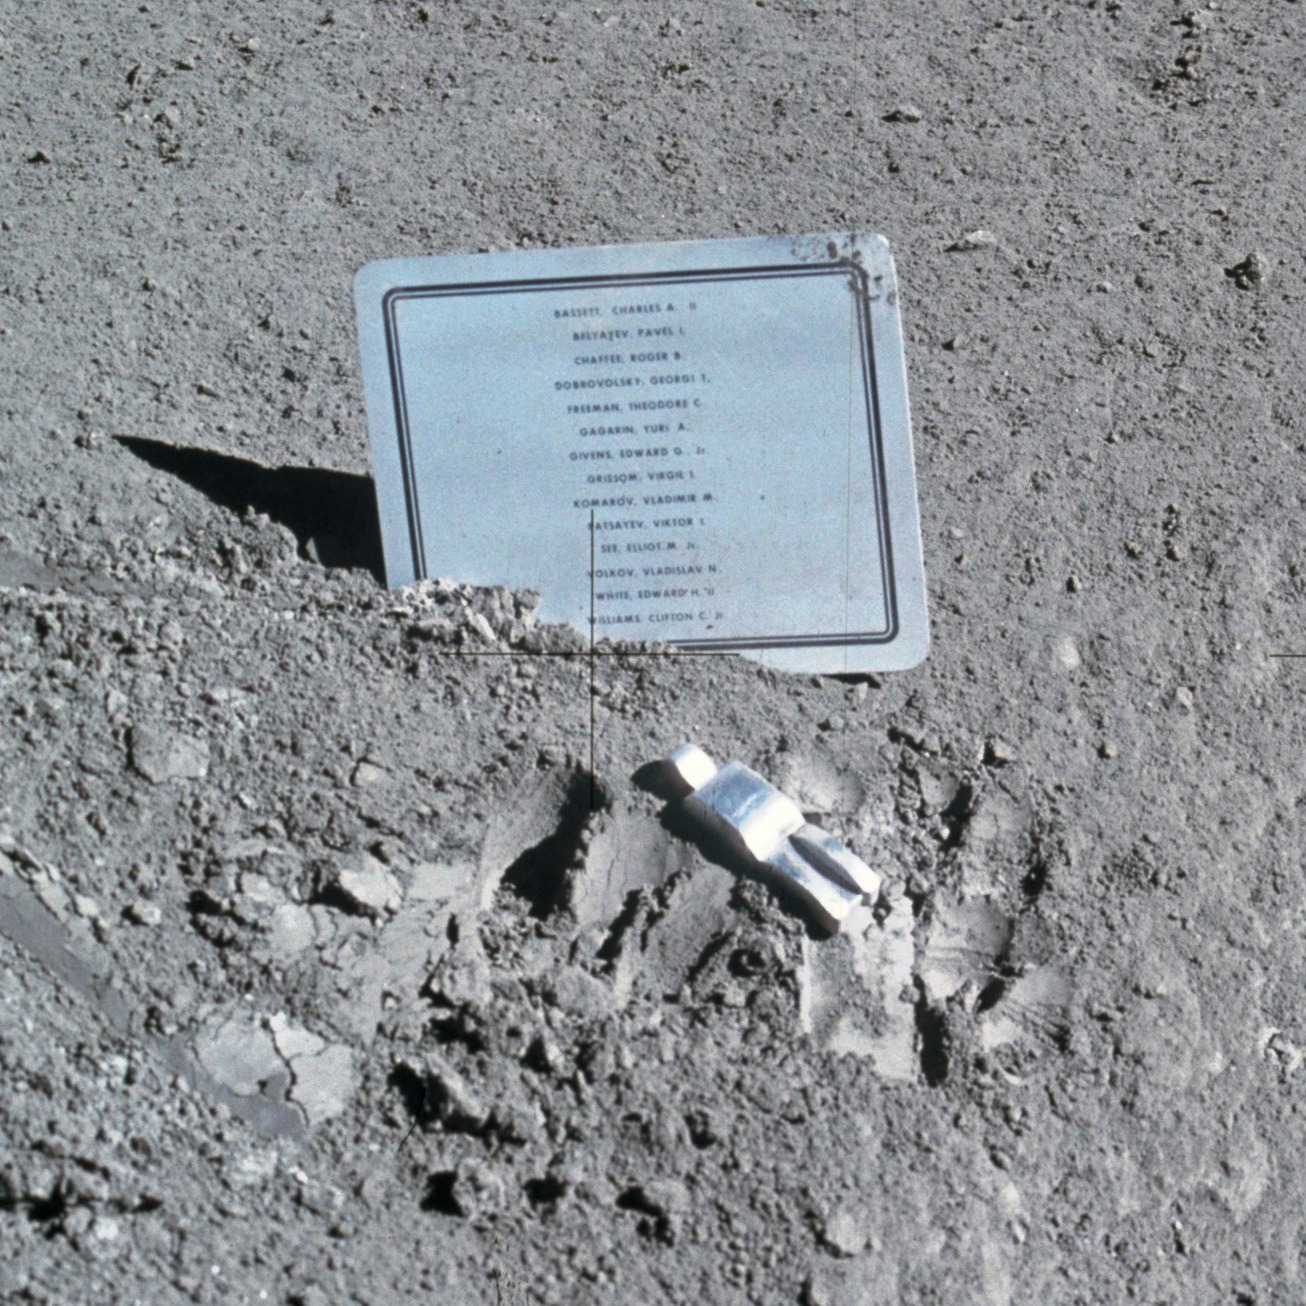 The tribute on the moon to the missing astronauts